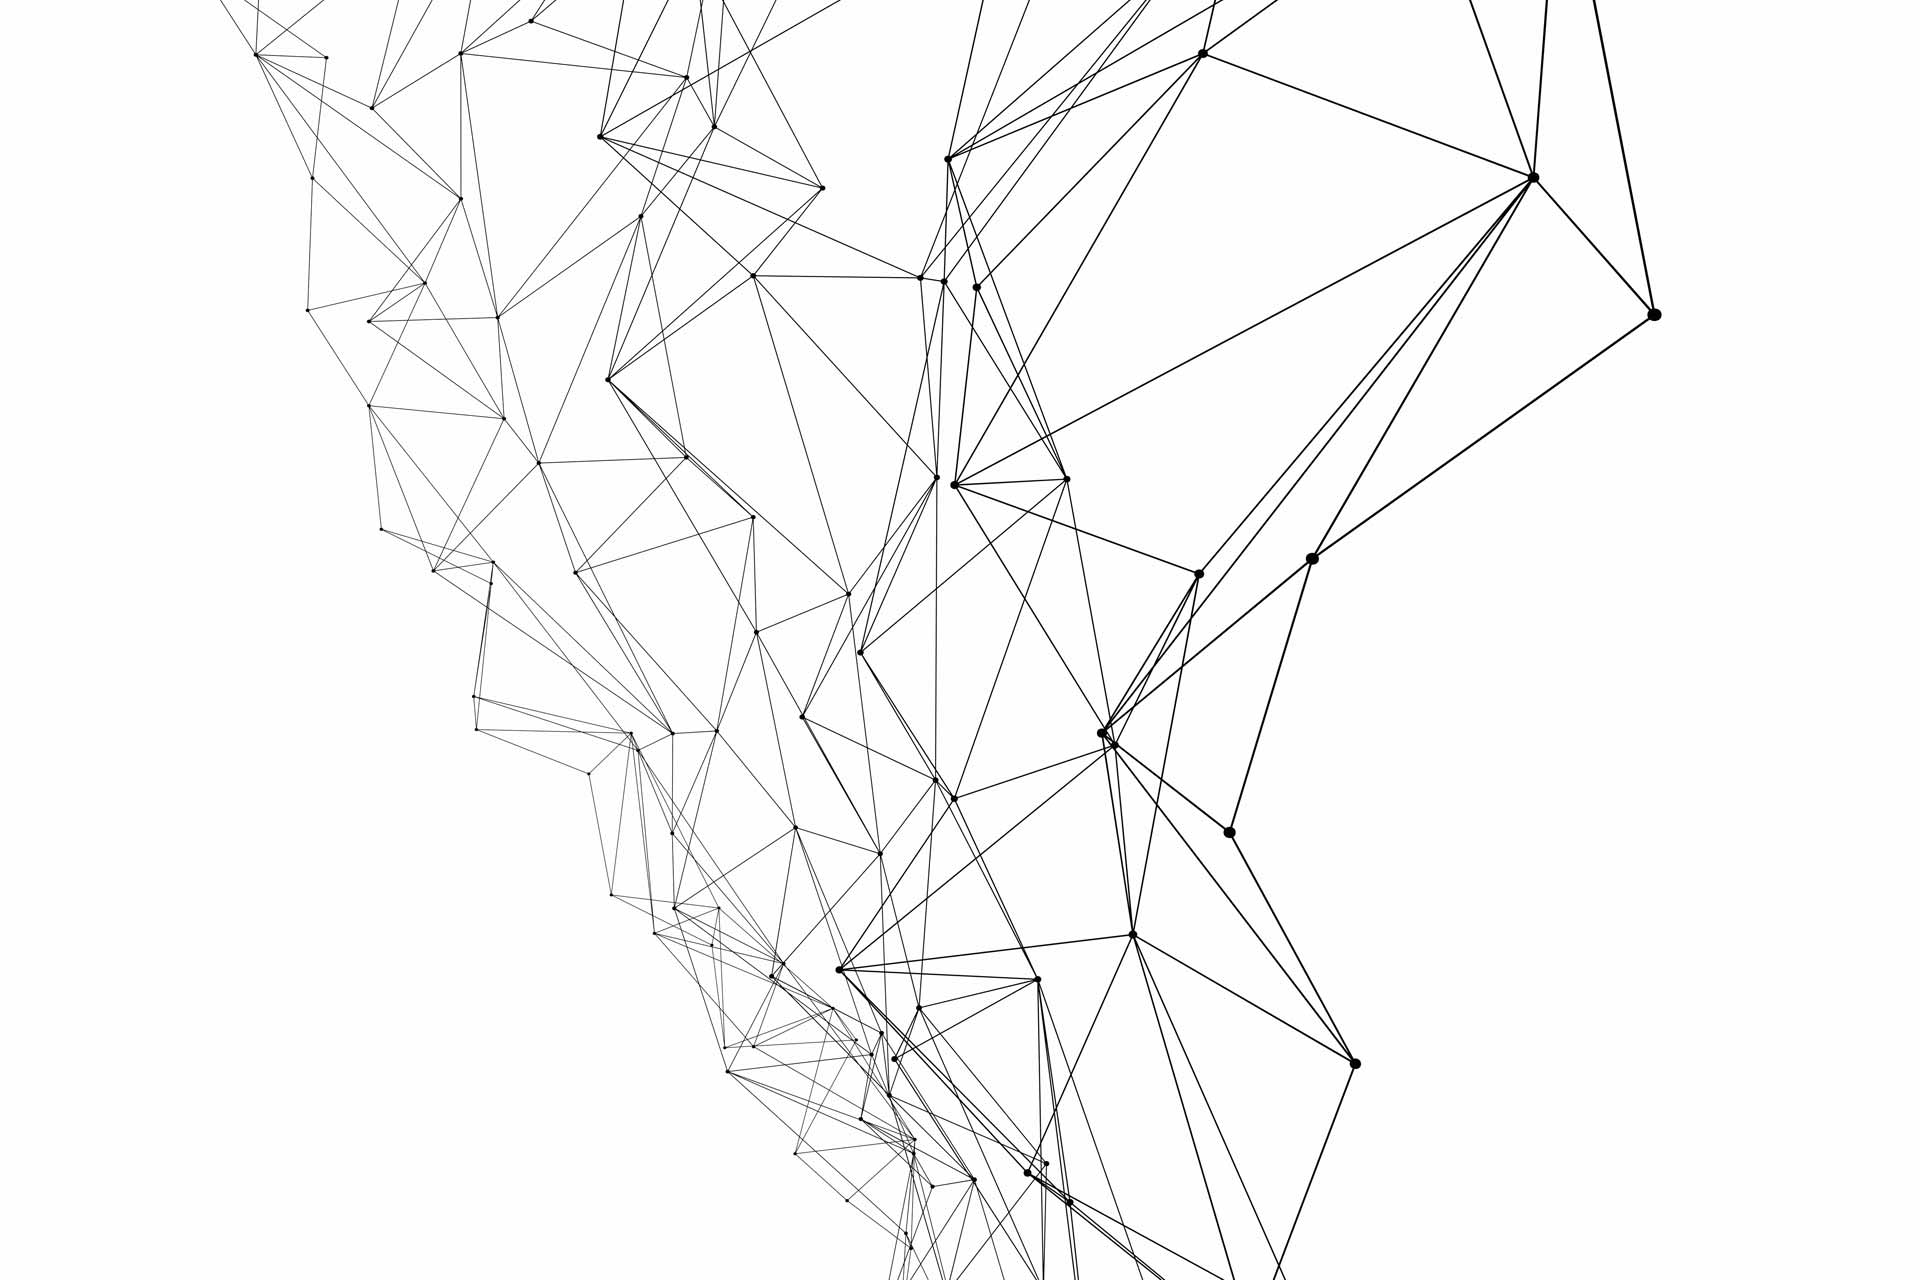 Connectivity graphic created by dots and lines